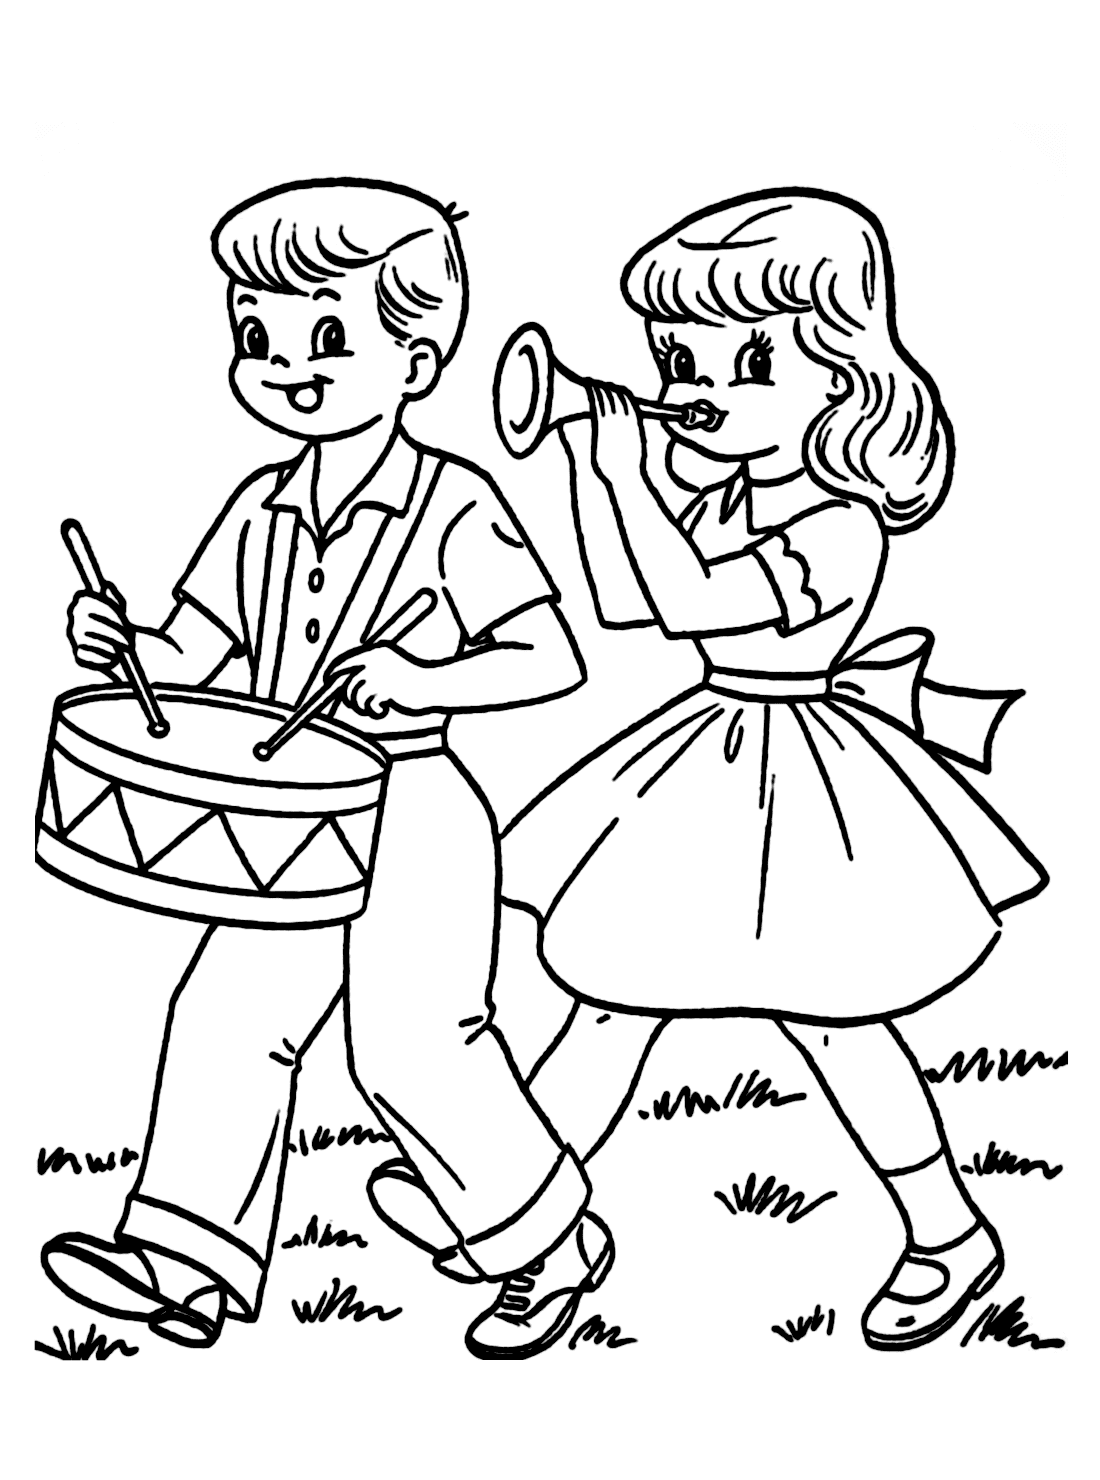 Drummer boy and girl coloring pages - Coloring Online Free